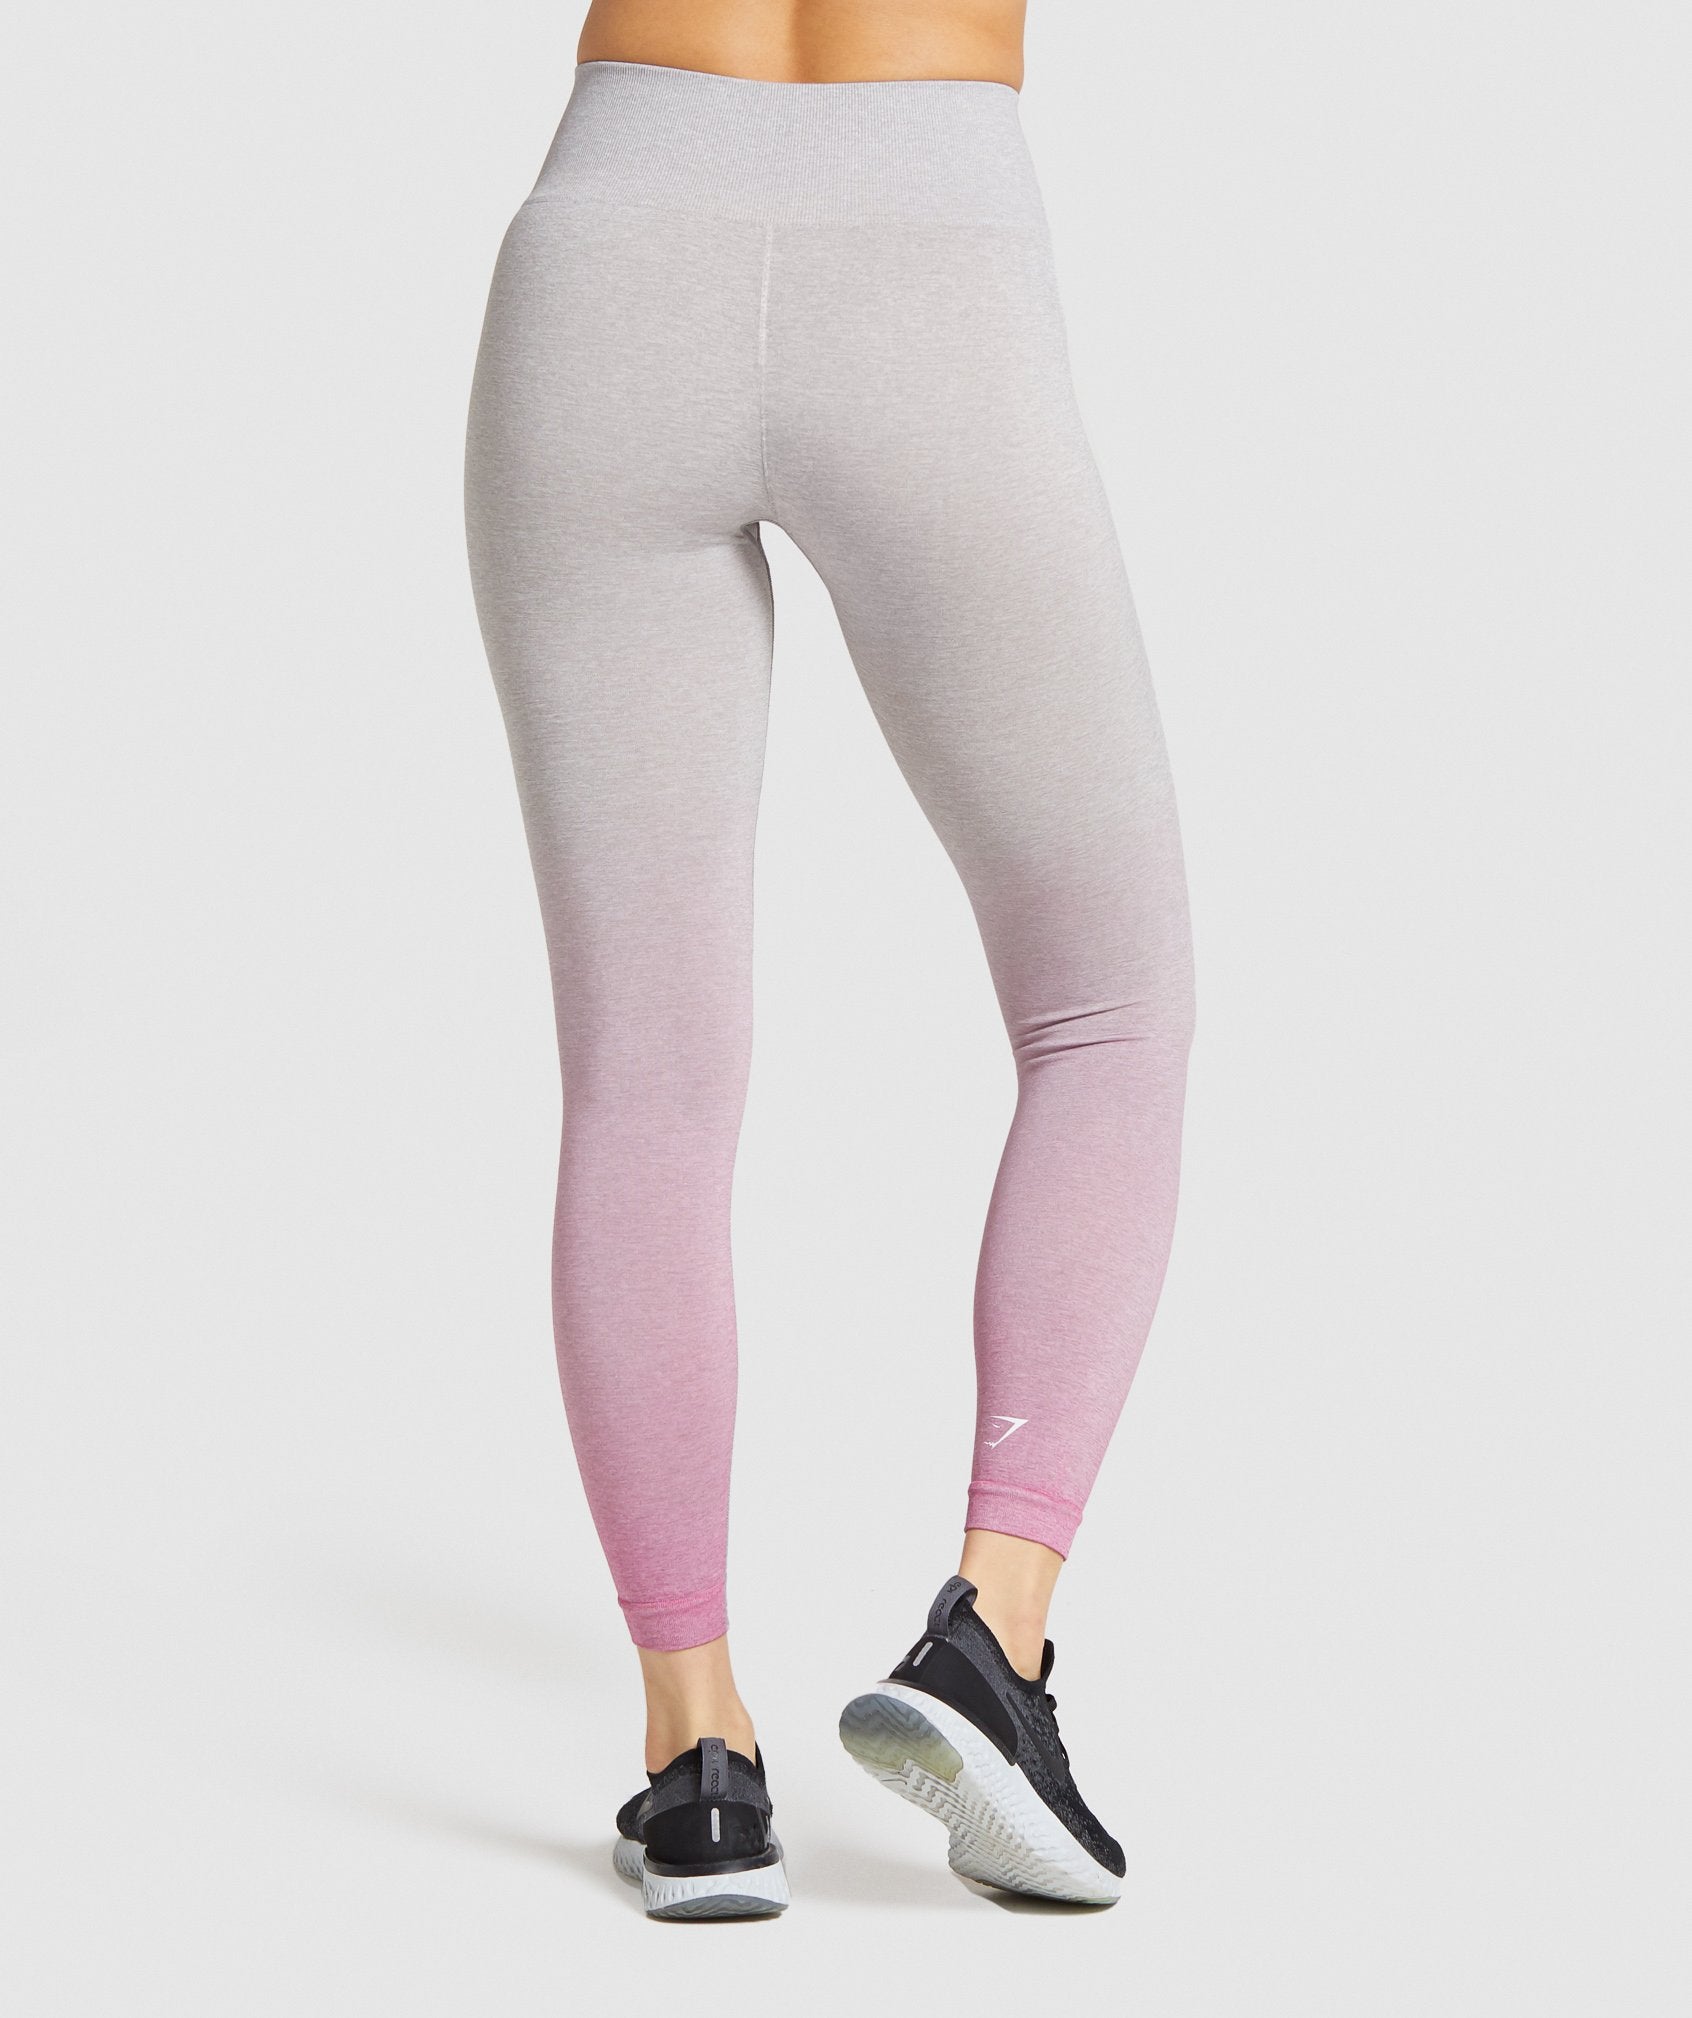 Adapt Ombre Seamless Leggings in Light Grey Marl/Pink